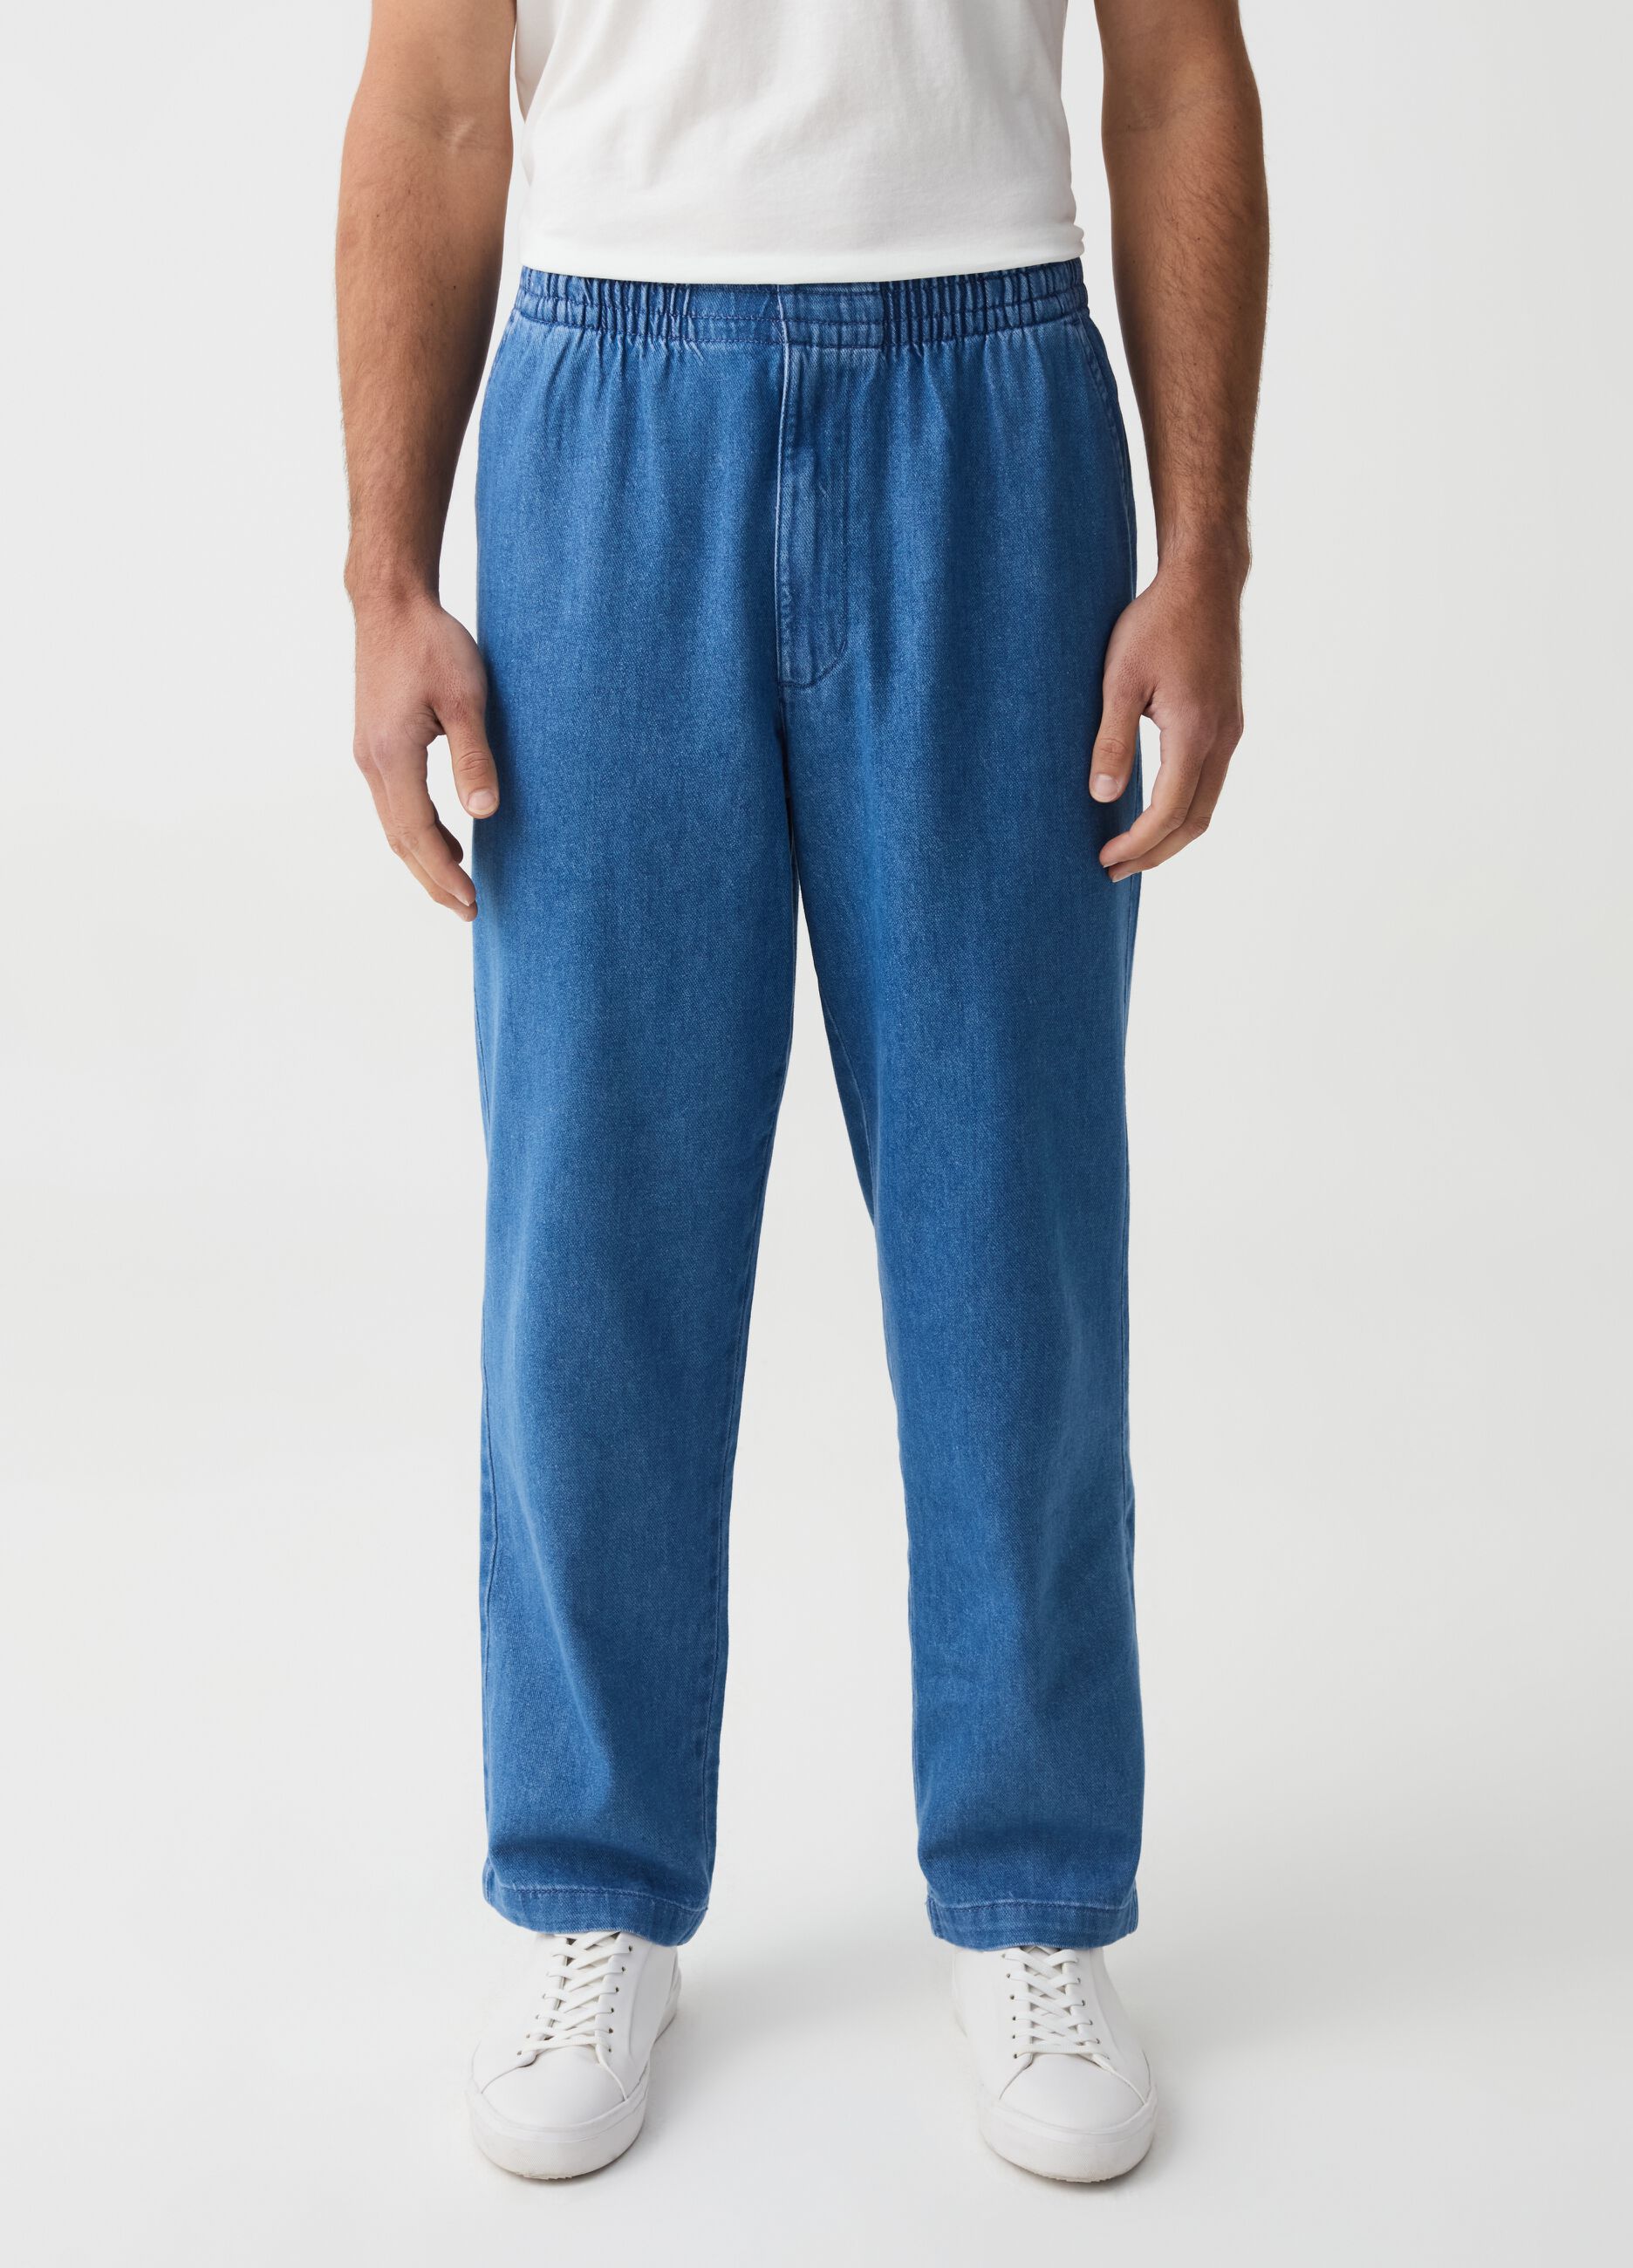 Chinos joggers relaxed fit de denim